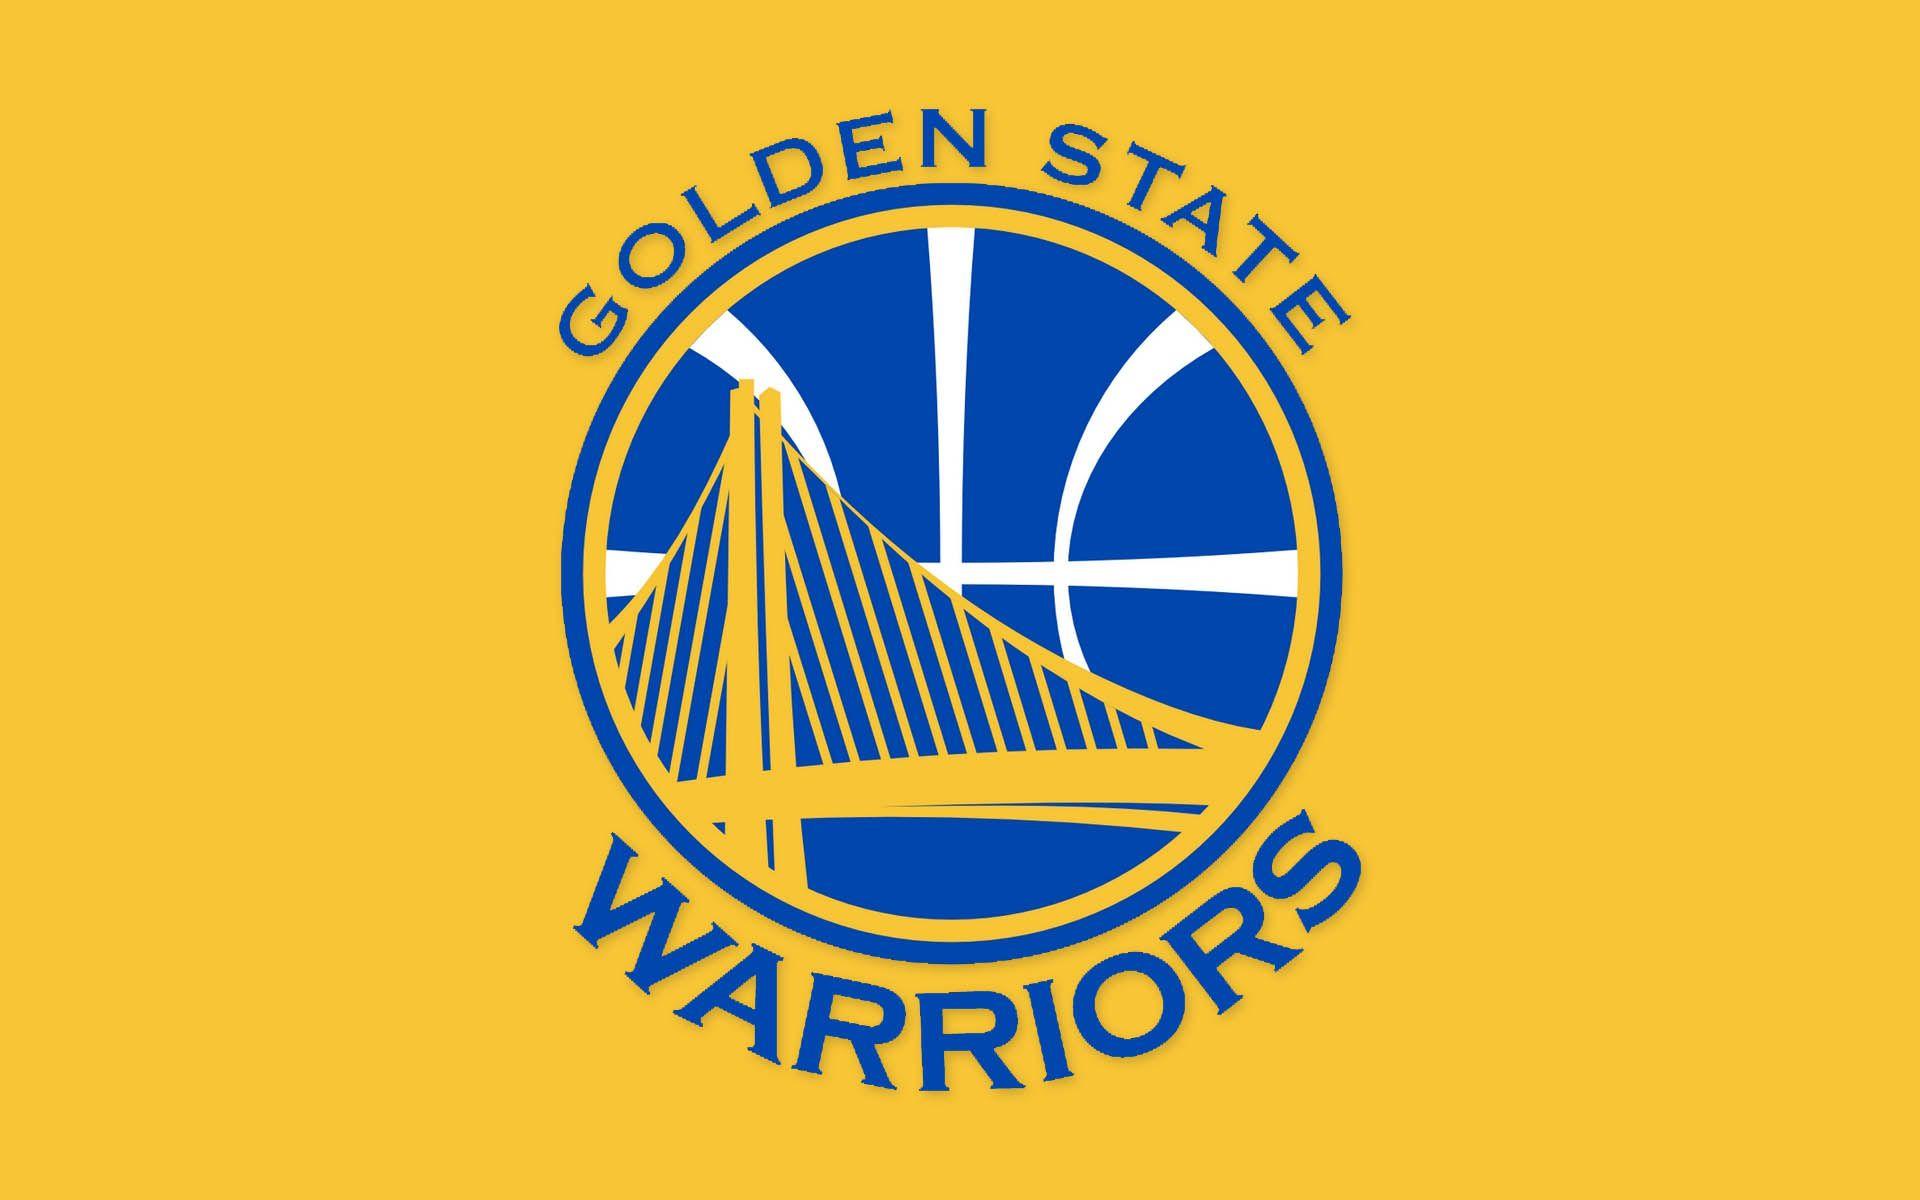 Golden State Warriors Strength in Numbers